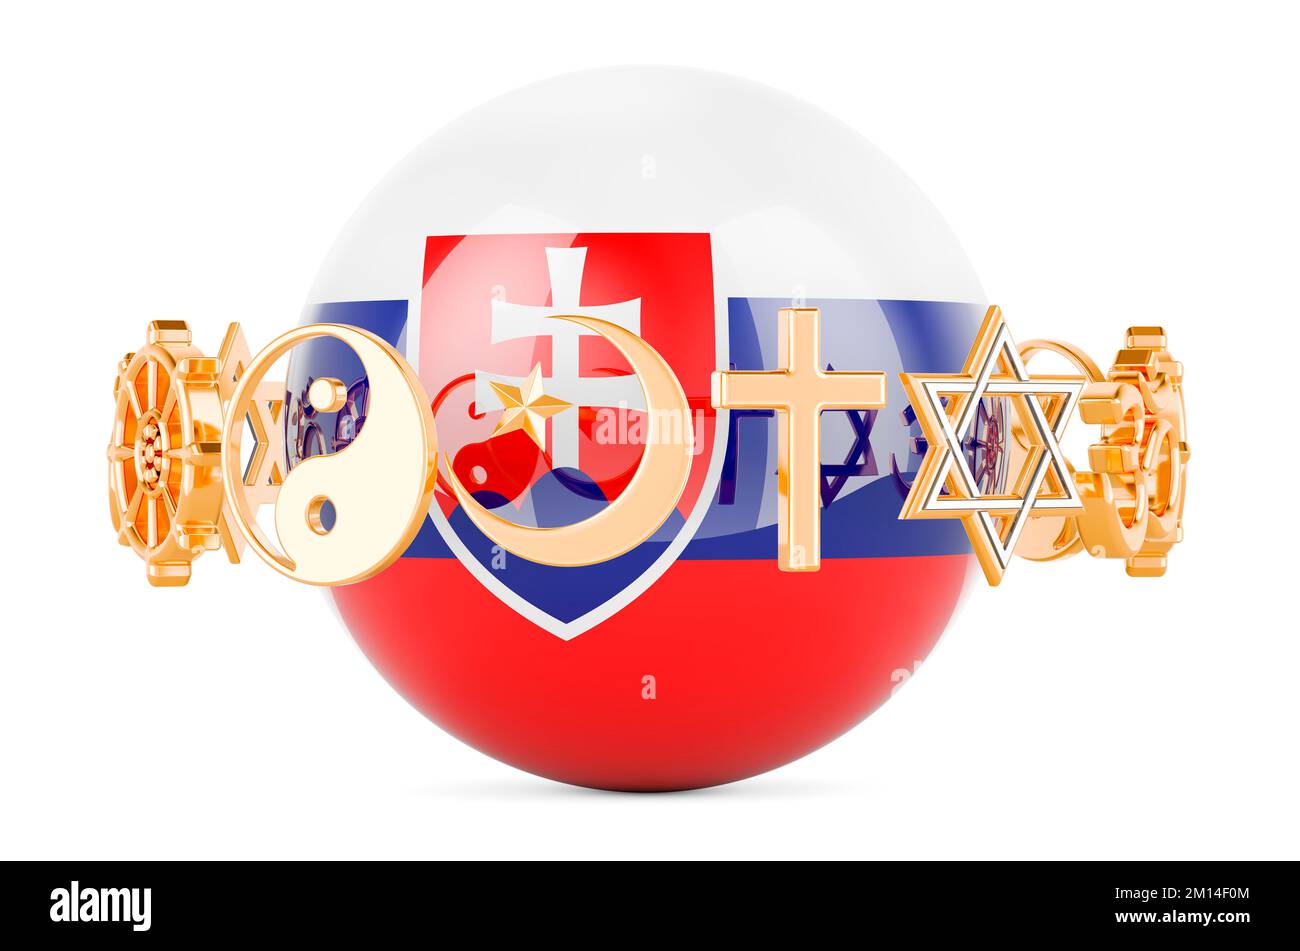 Slovak flag painted on sphere with religions symbols around, 3D rendering isolated on white background Stock Photo